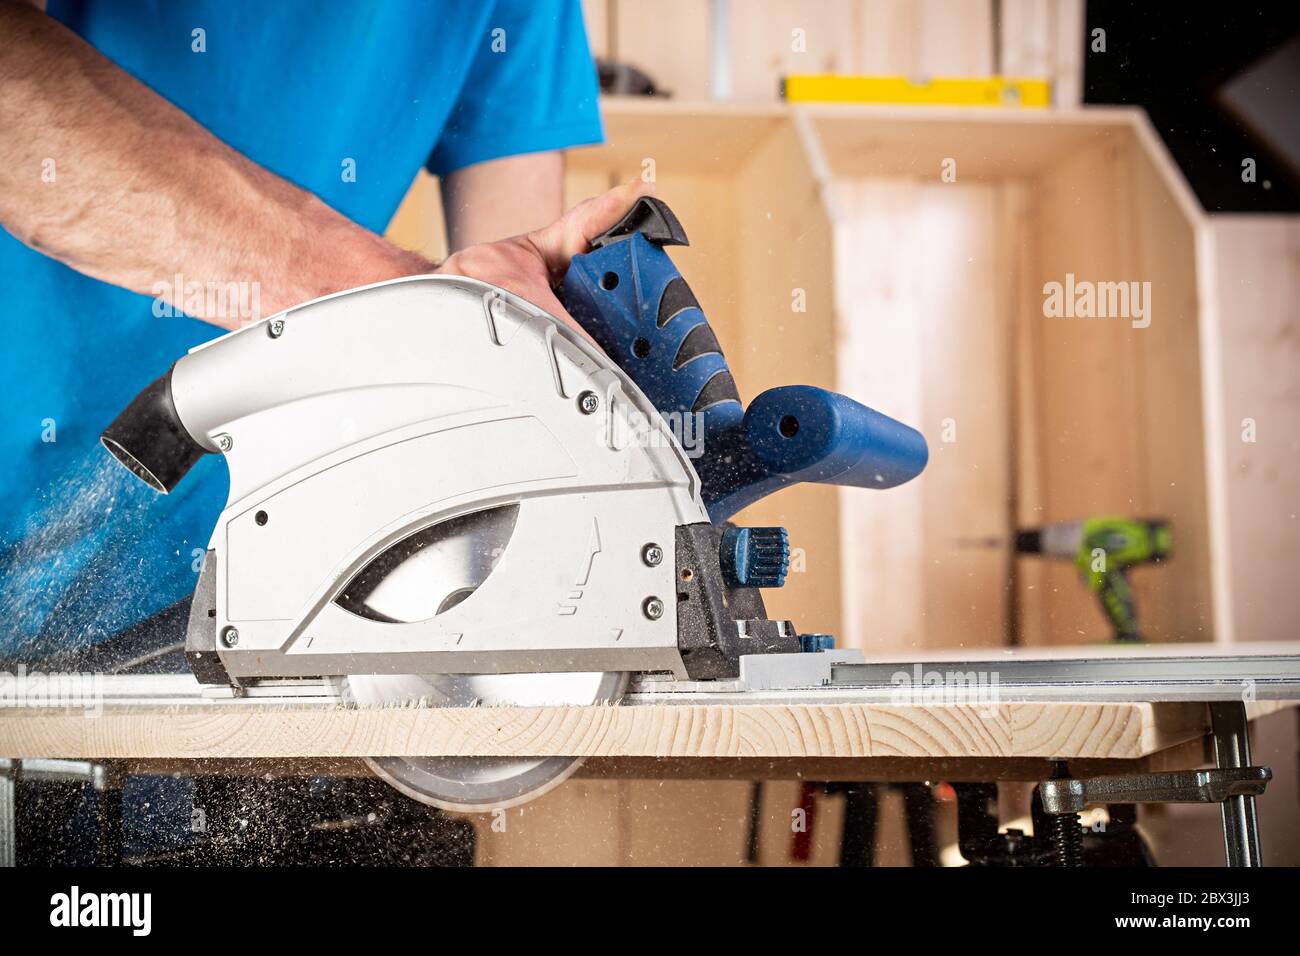 carpenter with hand circular saw at work. closeup of sawing a cut of pine wood woodworking construction tool concept furniture making diy background Stock Photo